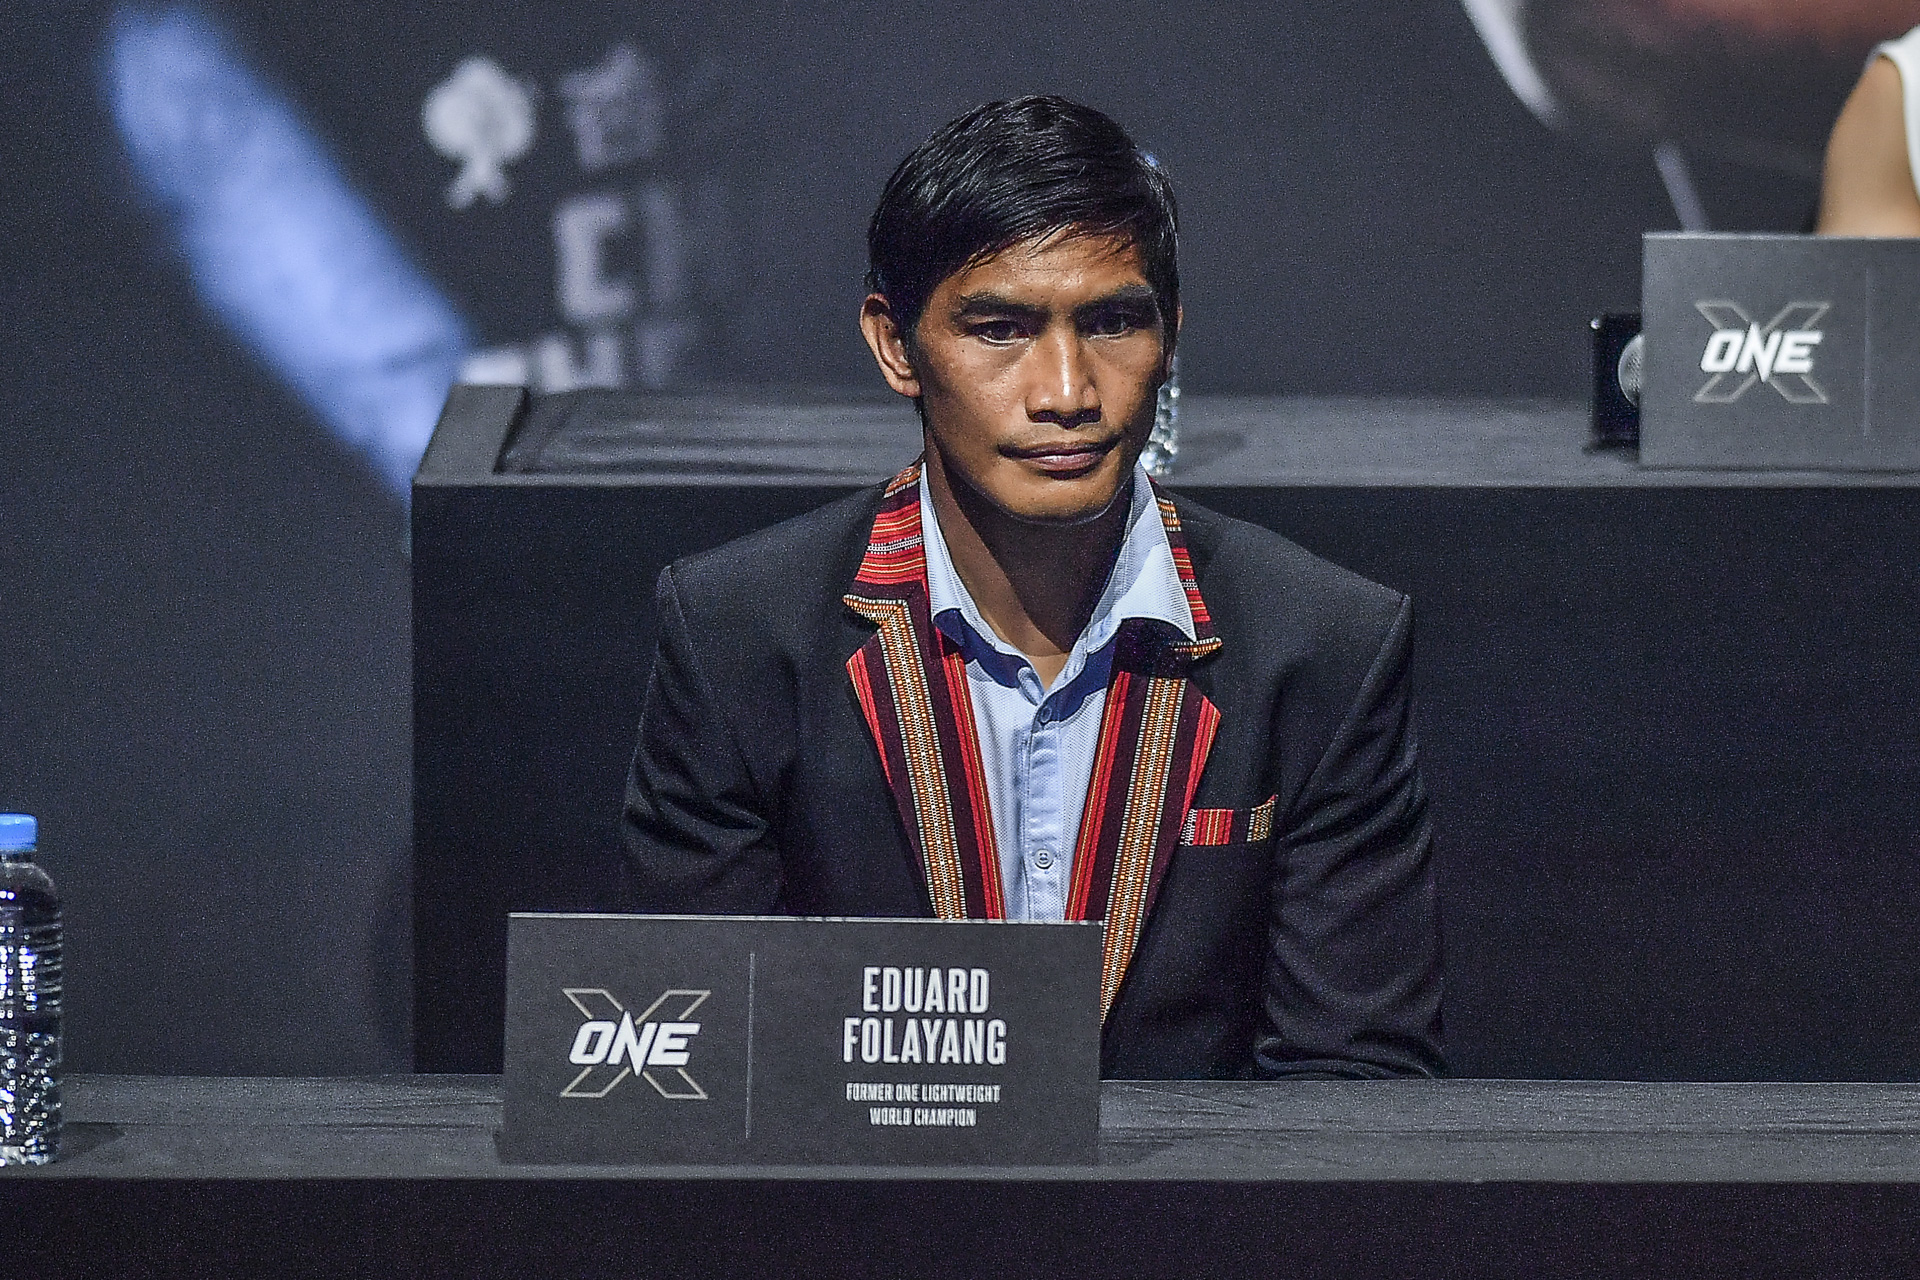 Team Lakay's Eduard Folayang during ONE X press conference at Singapore Indoor Stadium. ONE CHAMPIONSHIP PHOTO